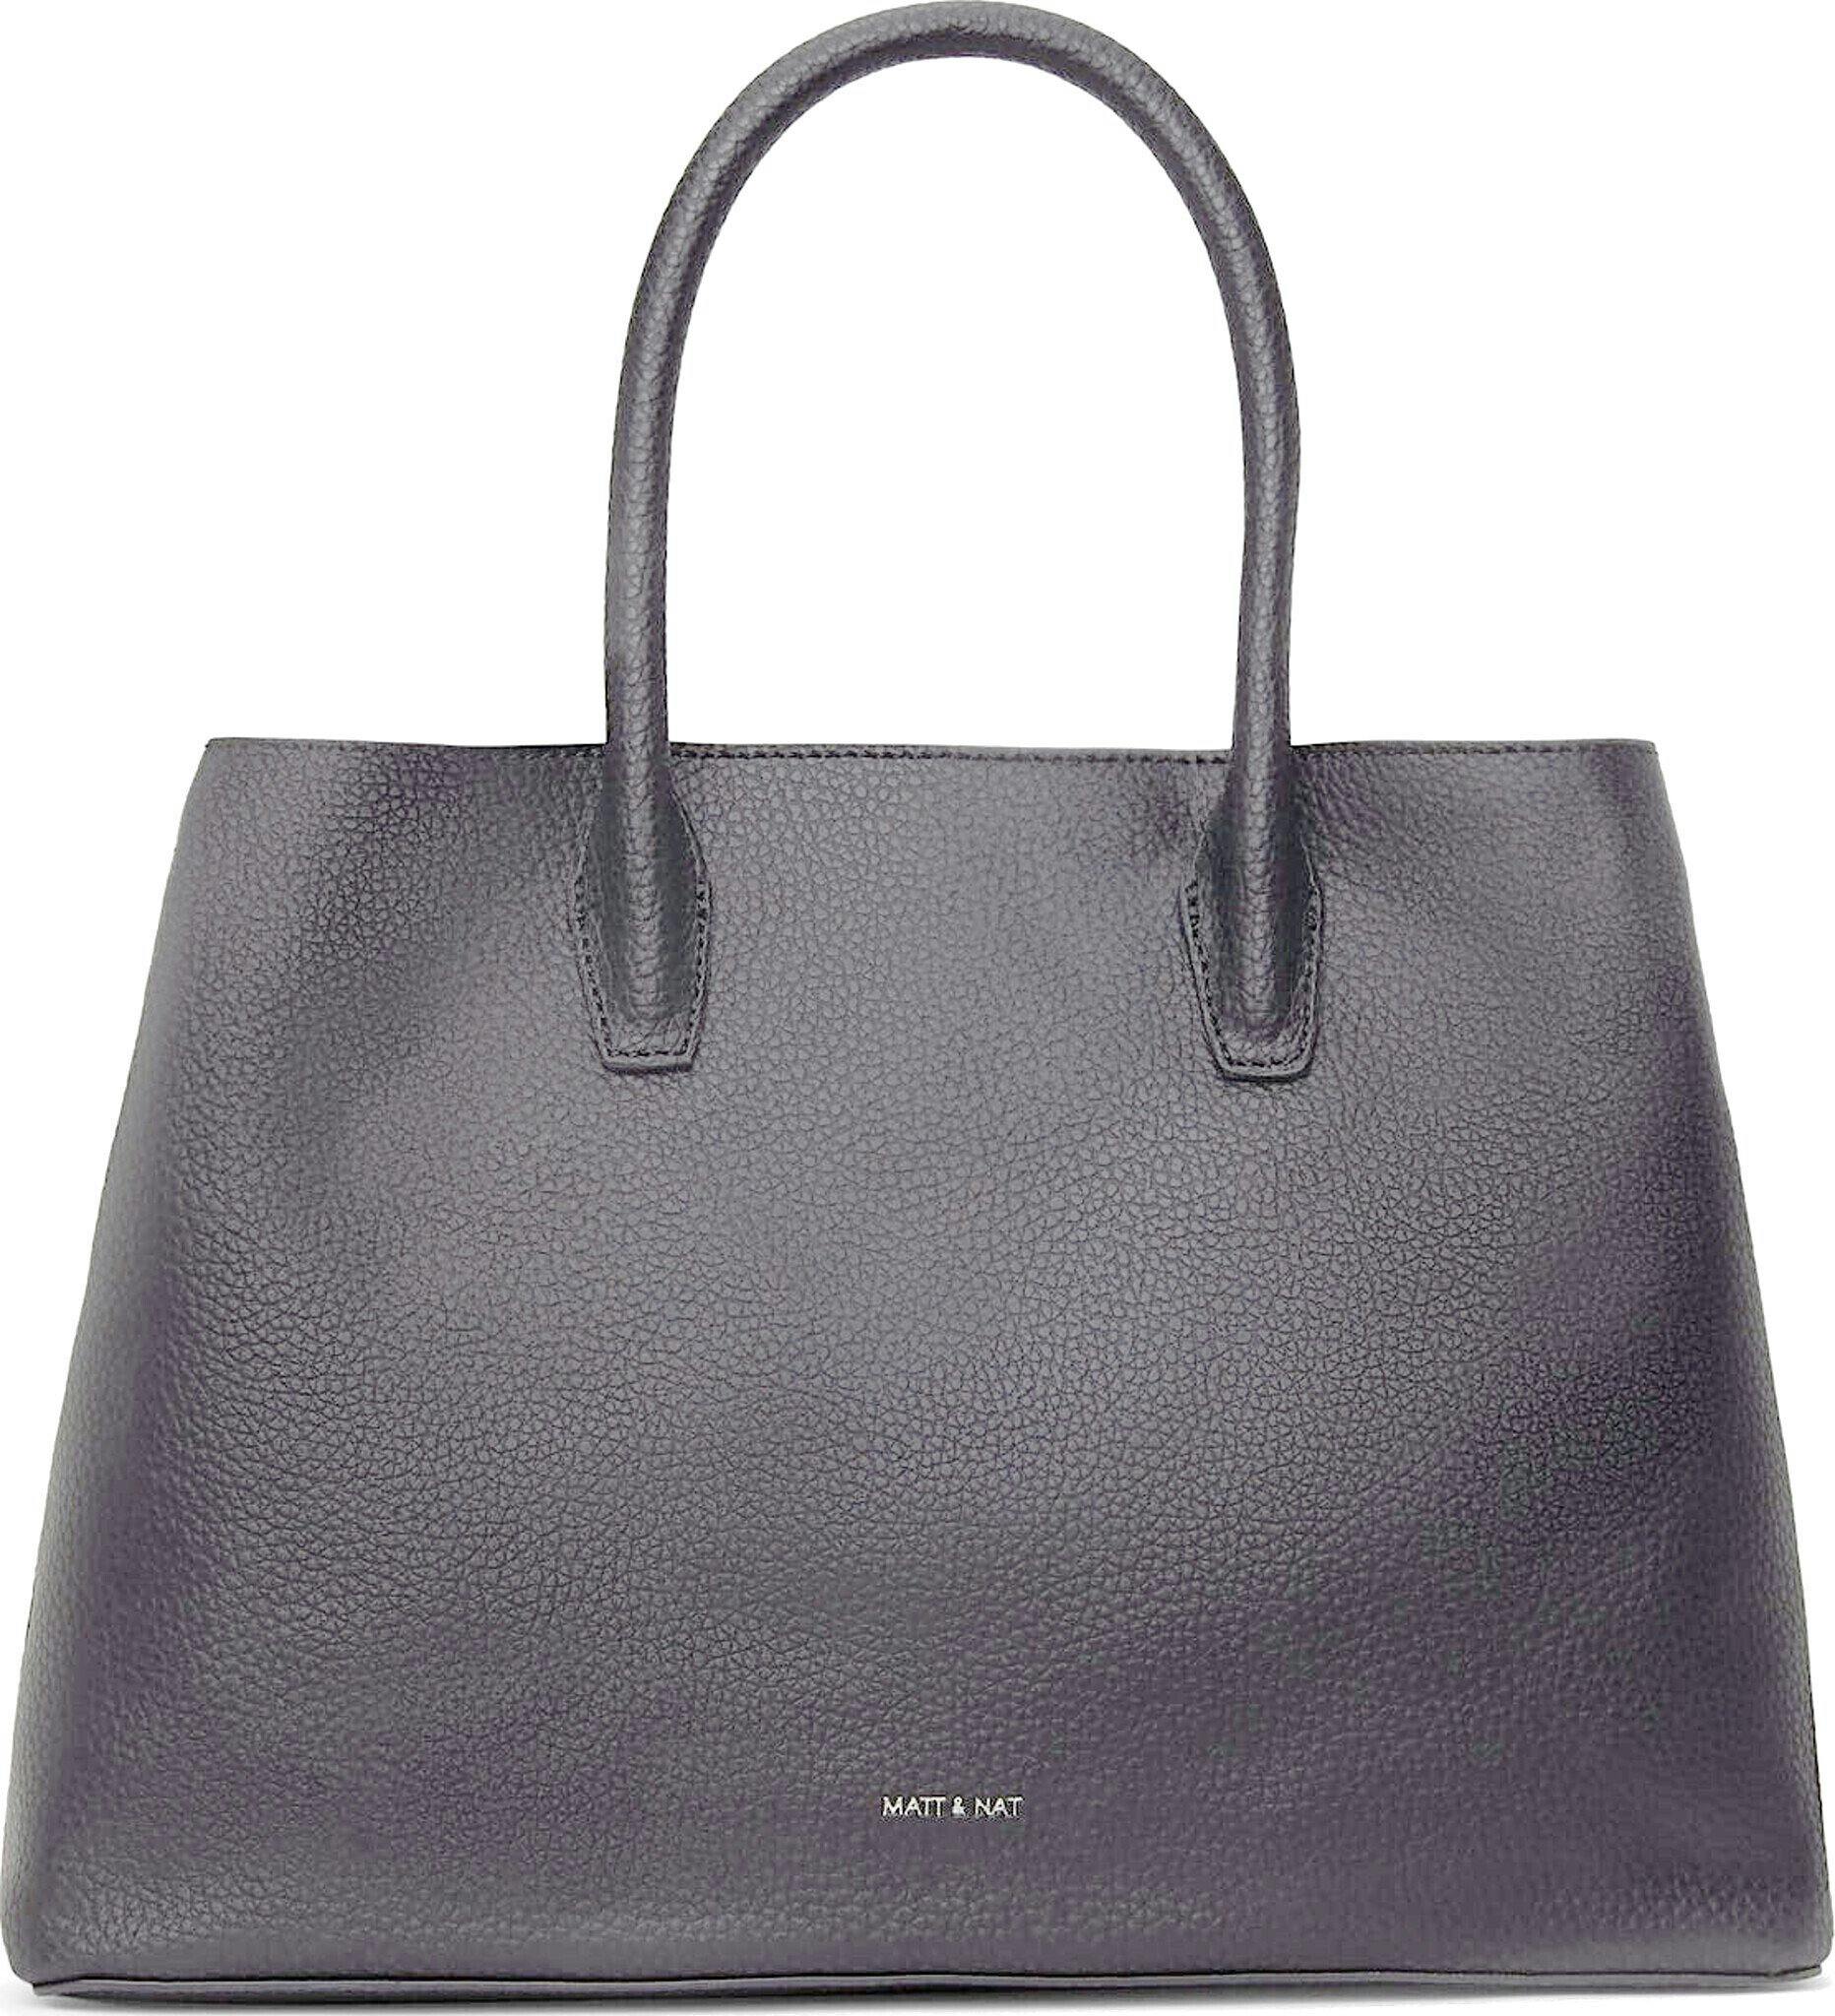 Product image for Kristasm Satchel Bag - Purity Collection 12L